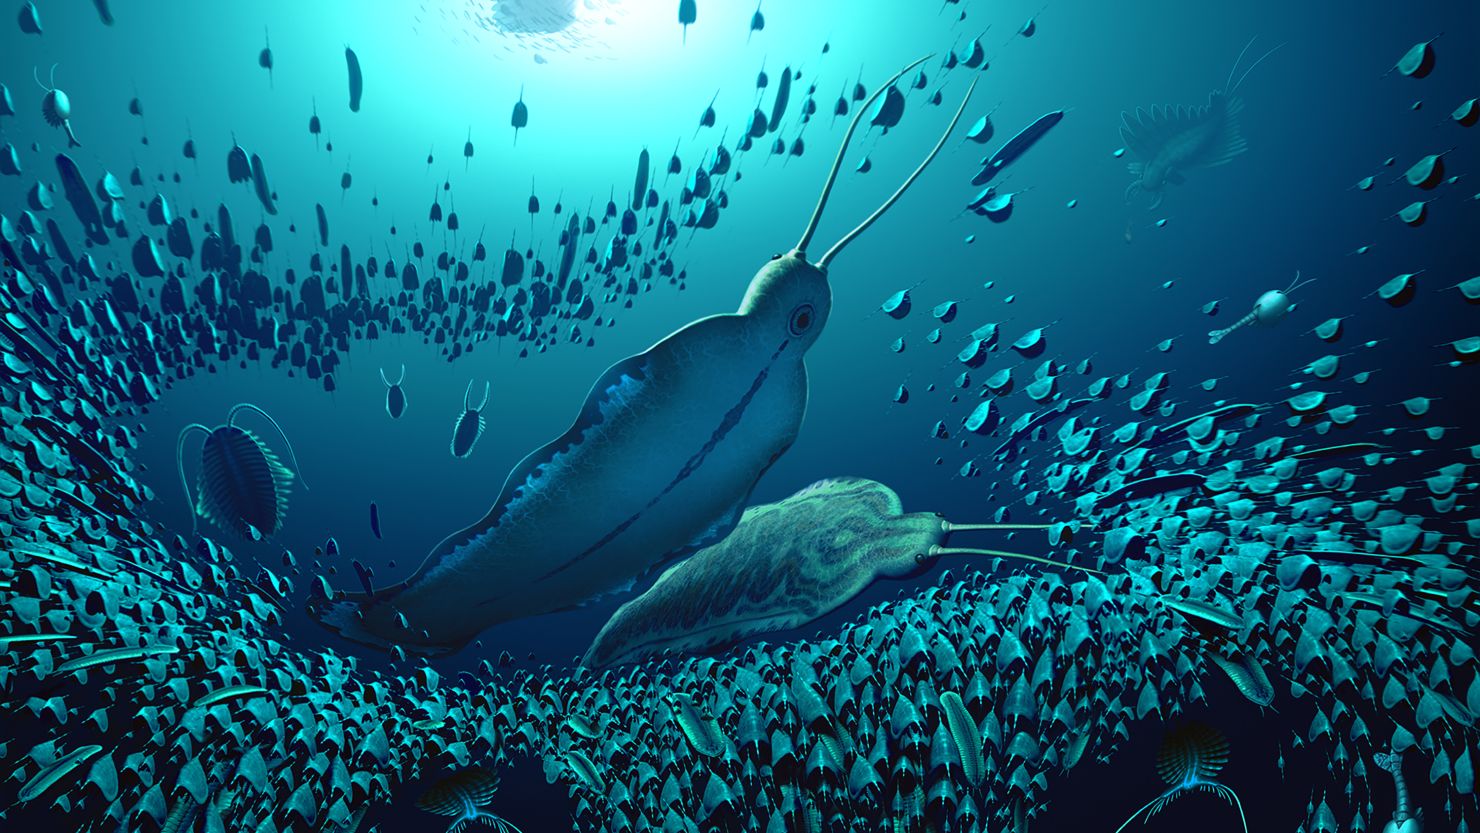 A reconstruction of the pelagic ecosystem and the organisms fossilised in Sirius Passet, revealing how Timorebestia was one of the largest predators in the water column more than 518 million years ago. CREDIT: Artwork by Bob Nicholls/@BobNichollsArt